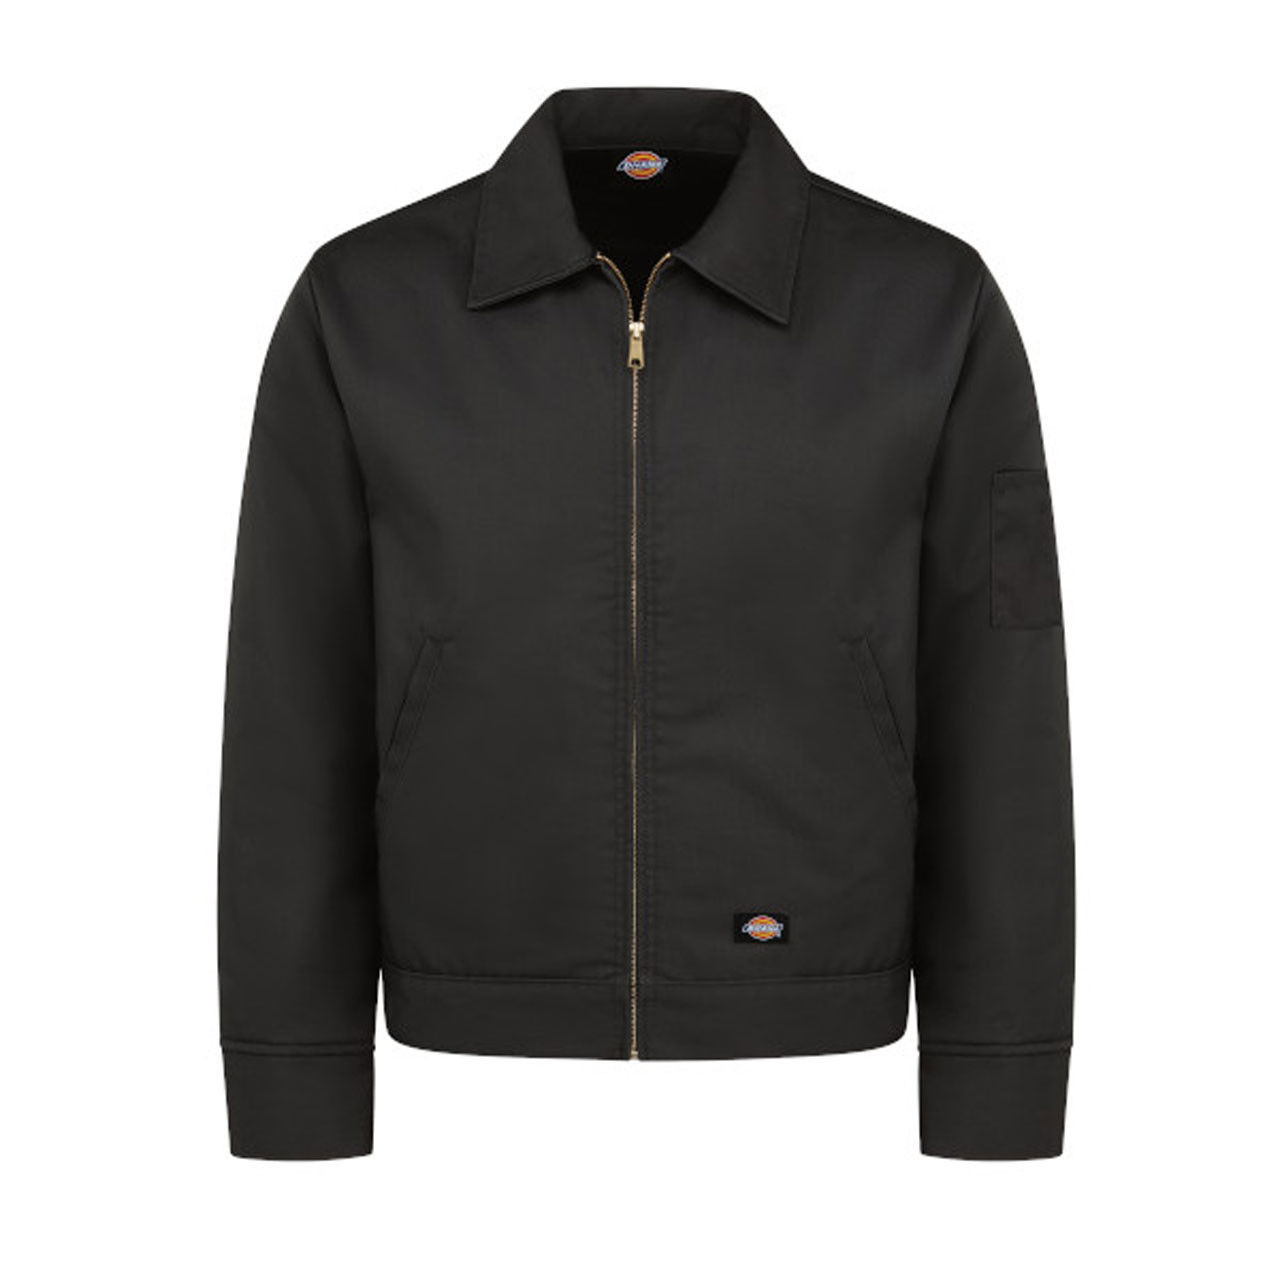 What material lines the black Dickies jacket?